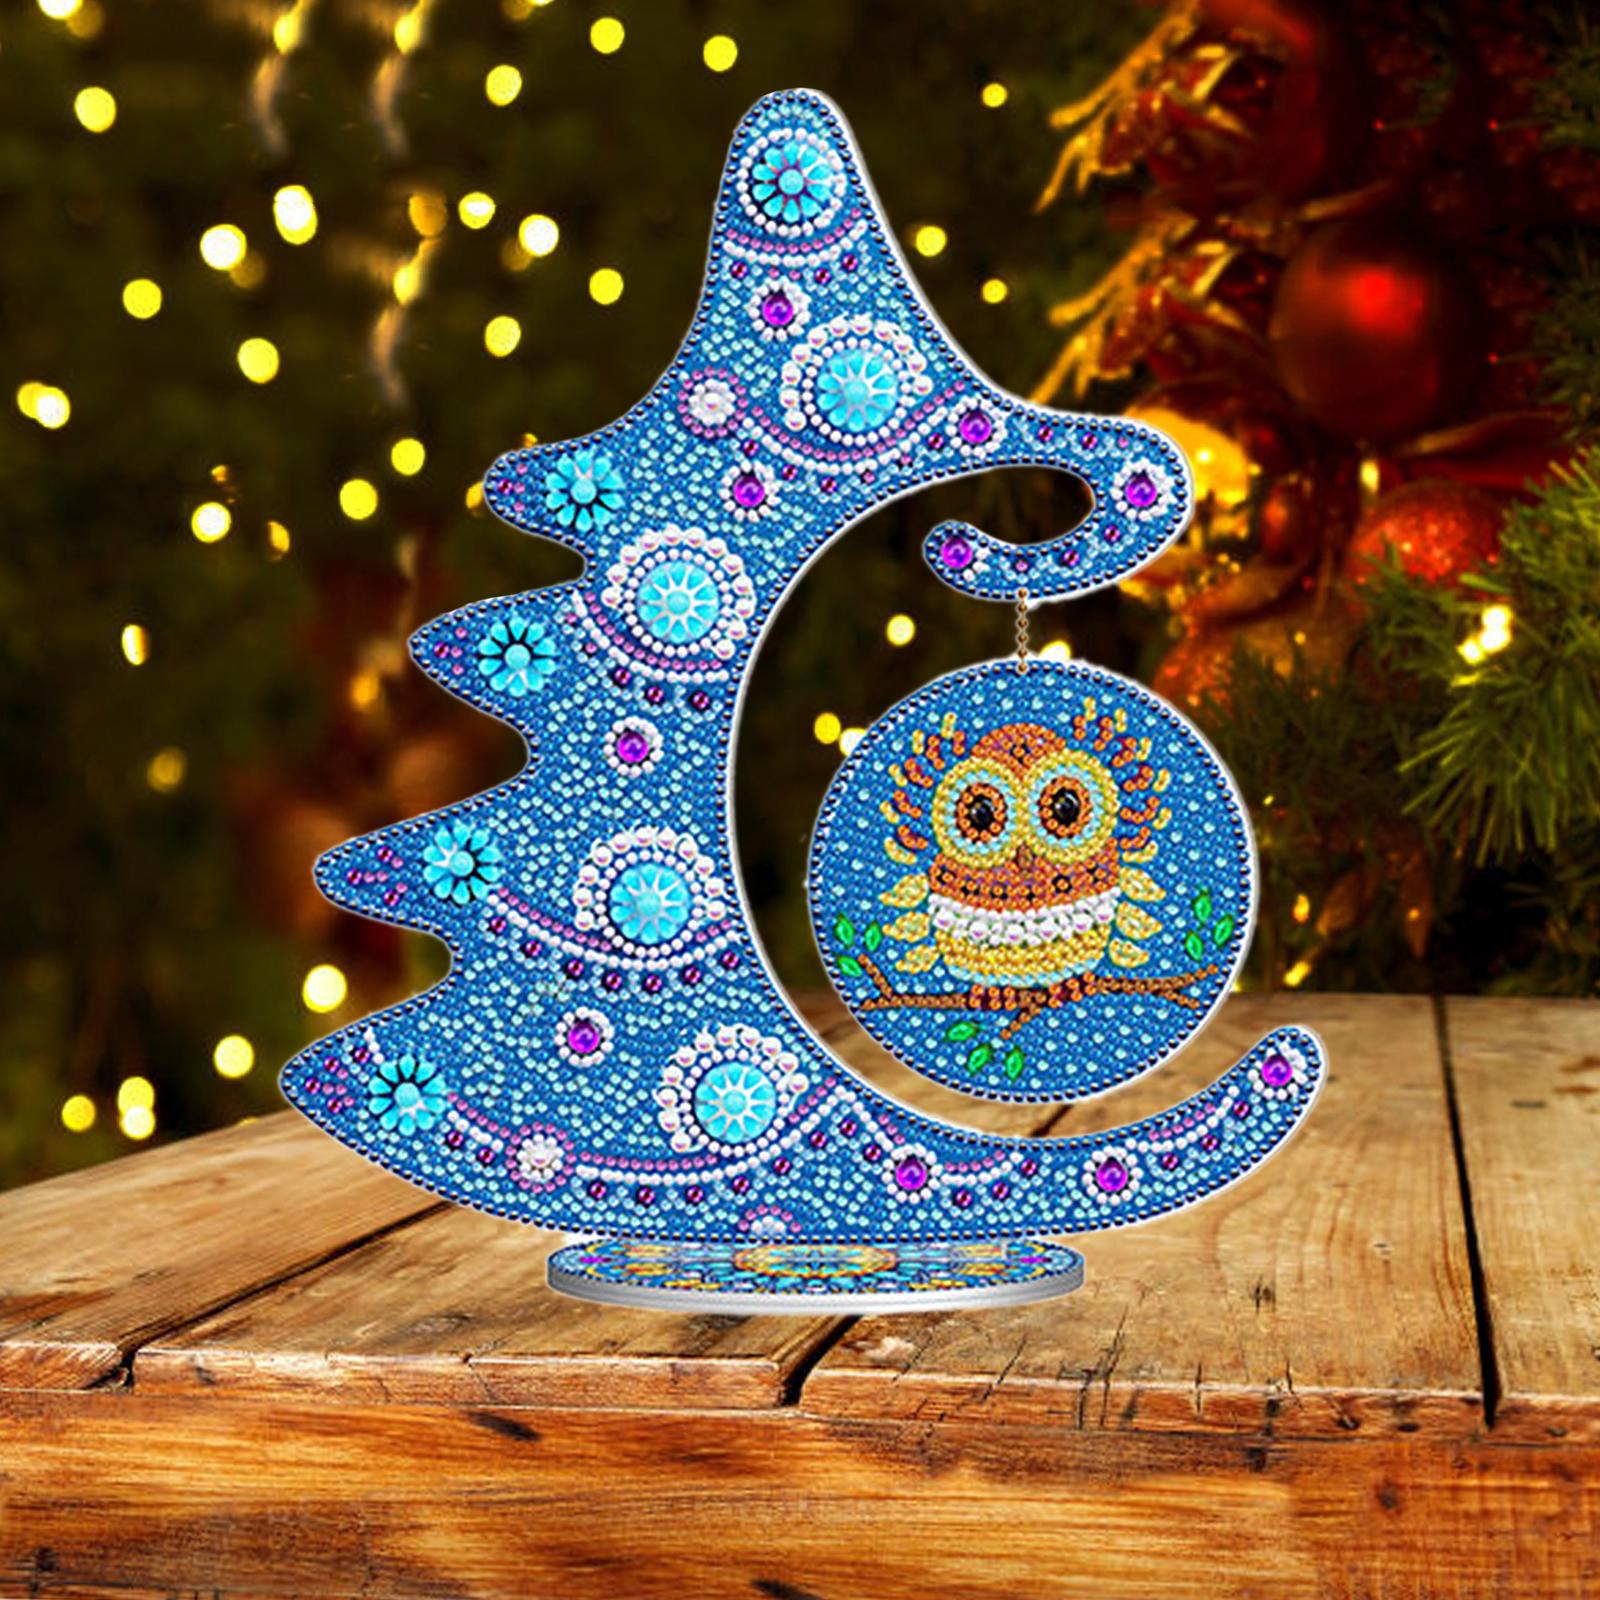 Diamond Painting Christmas Tree Craft 5D DIY Kit Ornament Gifts for New Year Blue 25x28.5cm